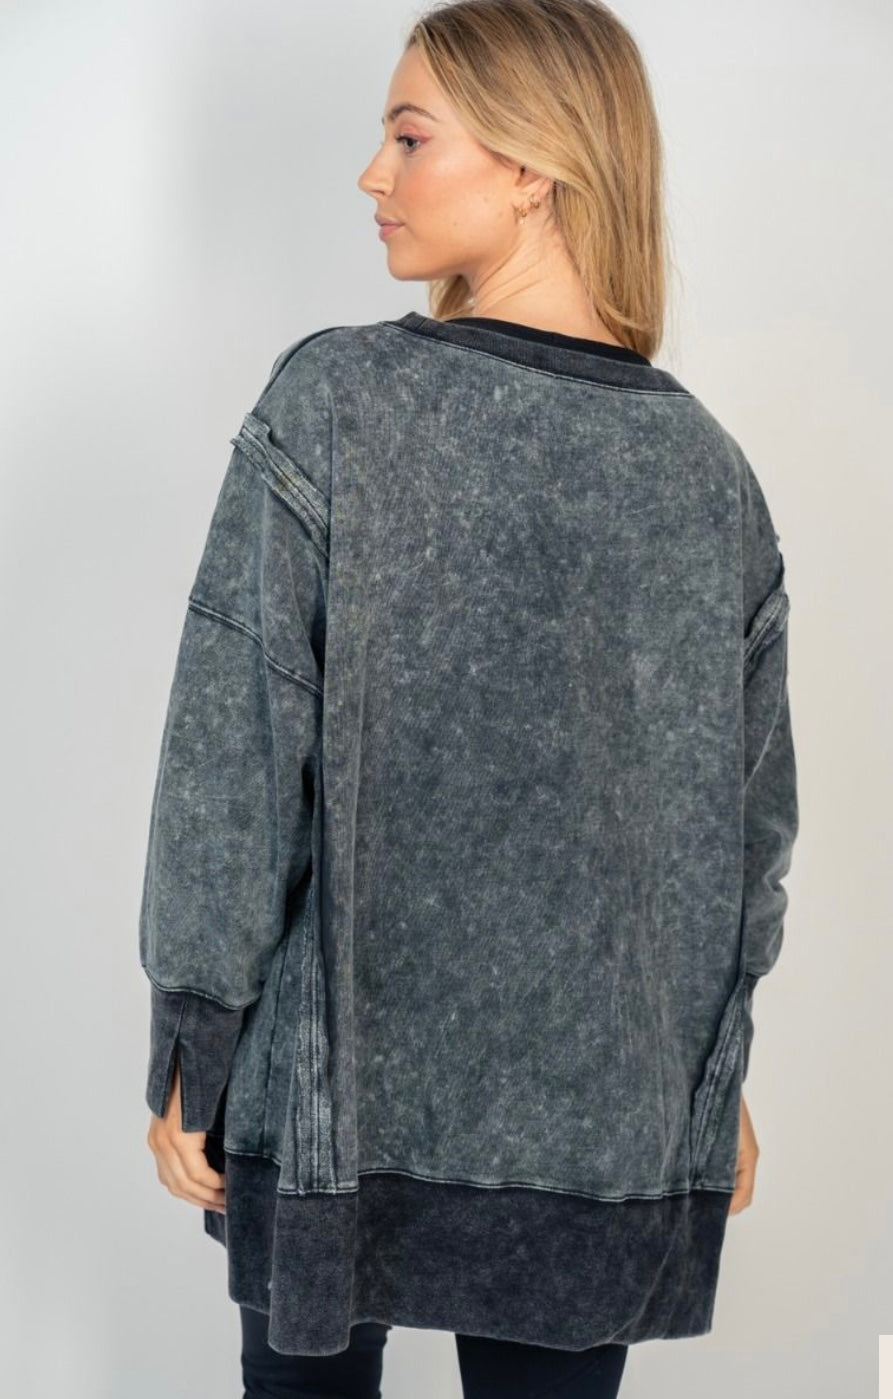 Mineral Washed Sweatshirt (2 Colors)